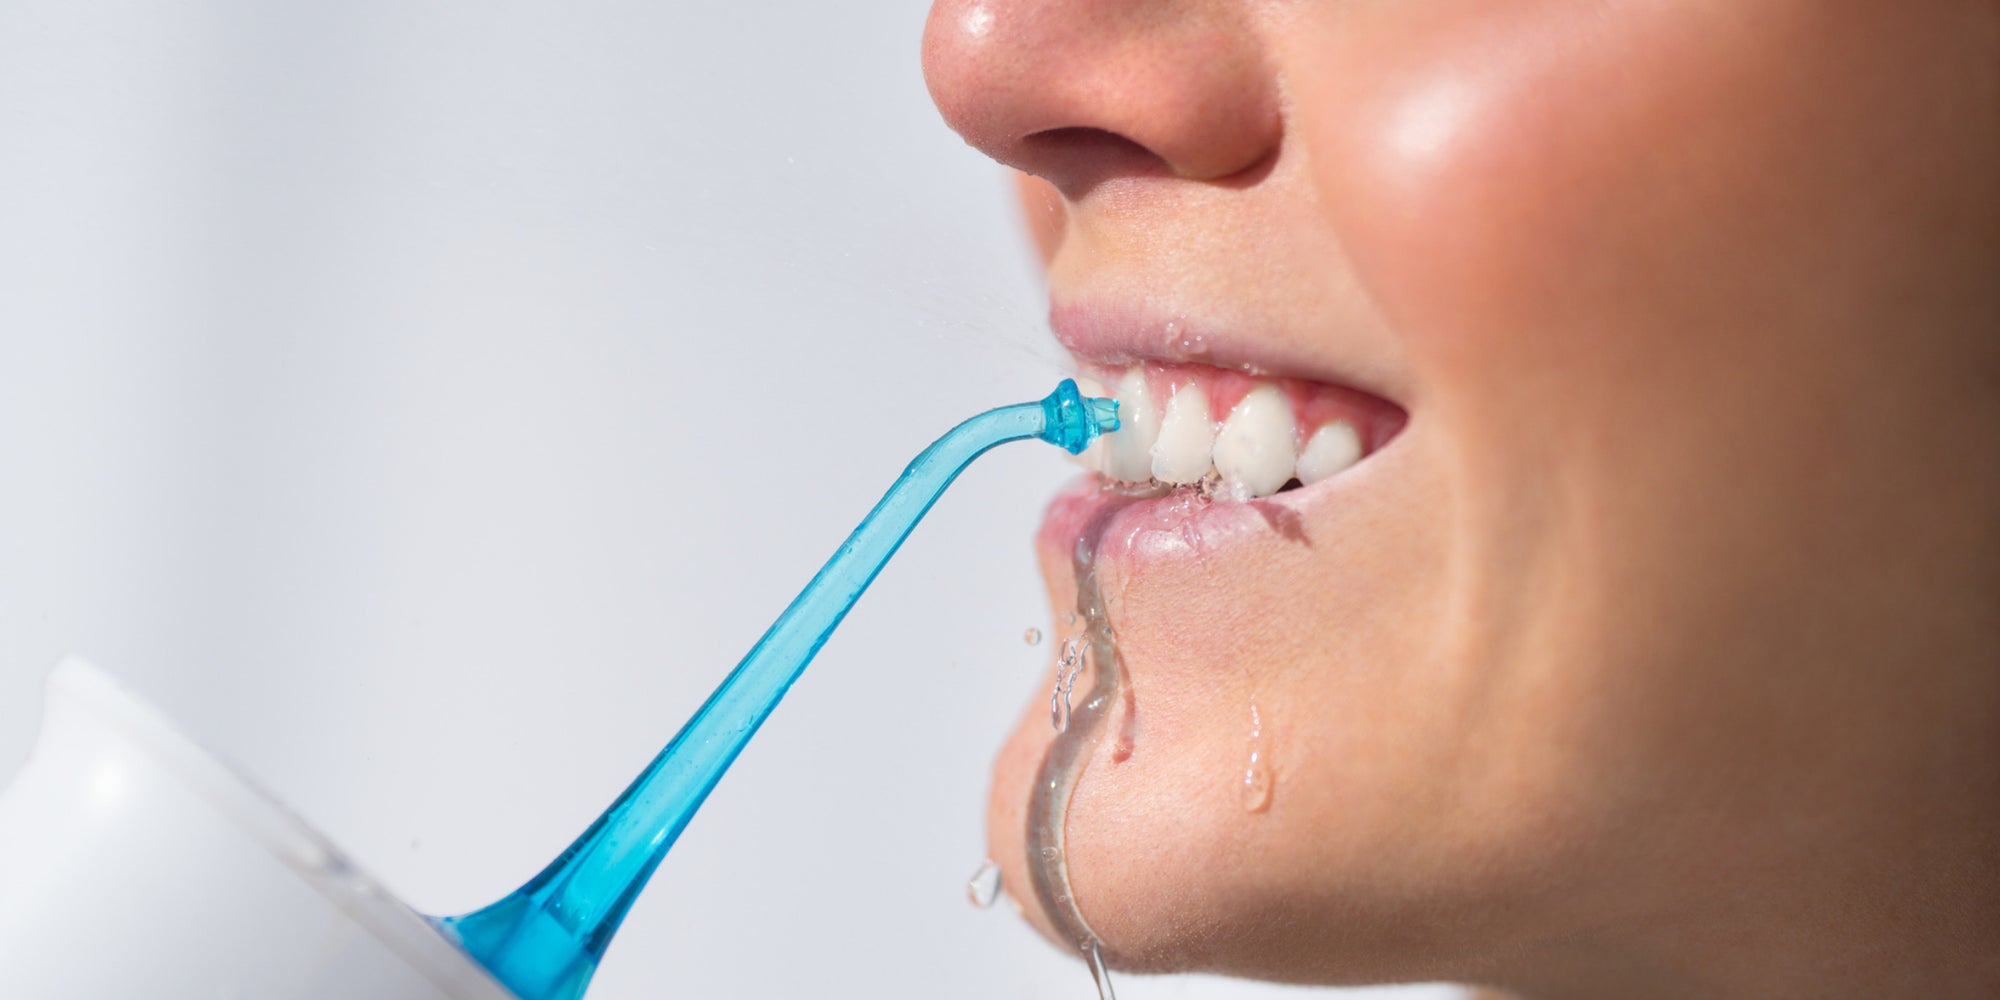 Can a Water Flosser Really Help Treat Periodontal Disease?